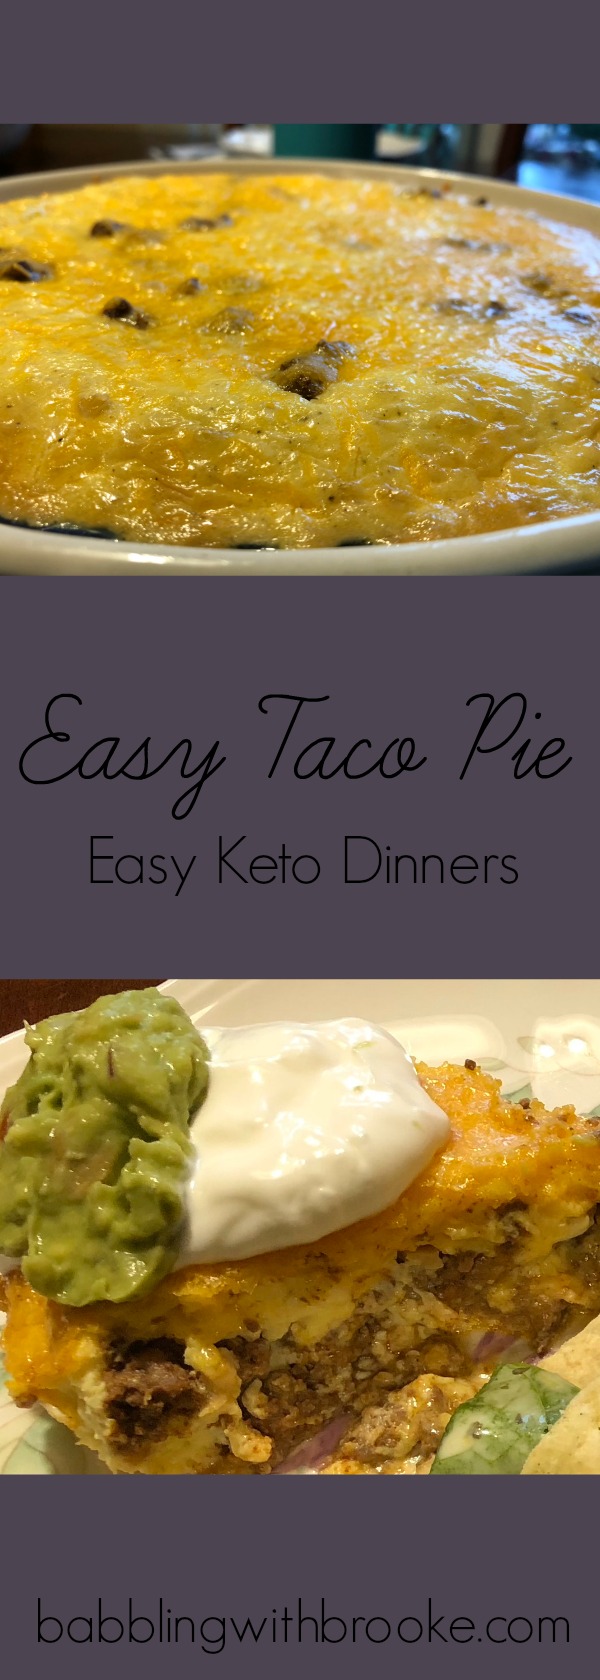 A great recipe for the entire family! This easy keto recipe will be enjoyed by all and is super easy to throw together on a busy night! One of the best keto dinners I have made! #easyketorecipes #ketodinnerrecipes #easyketorecipes #tacotuesday